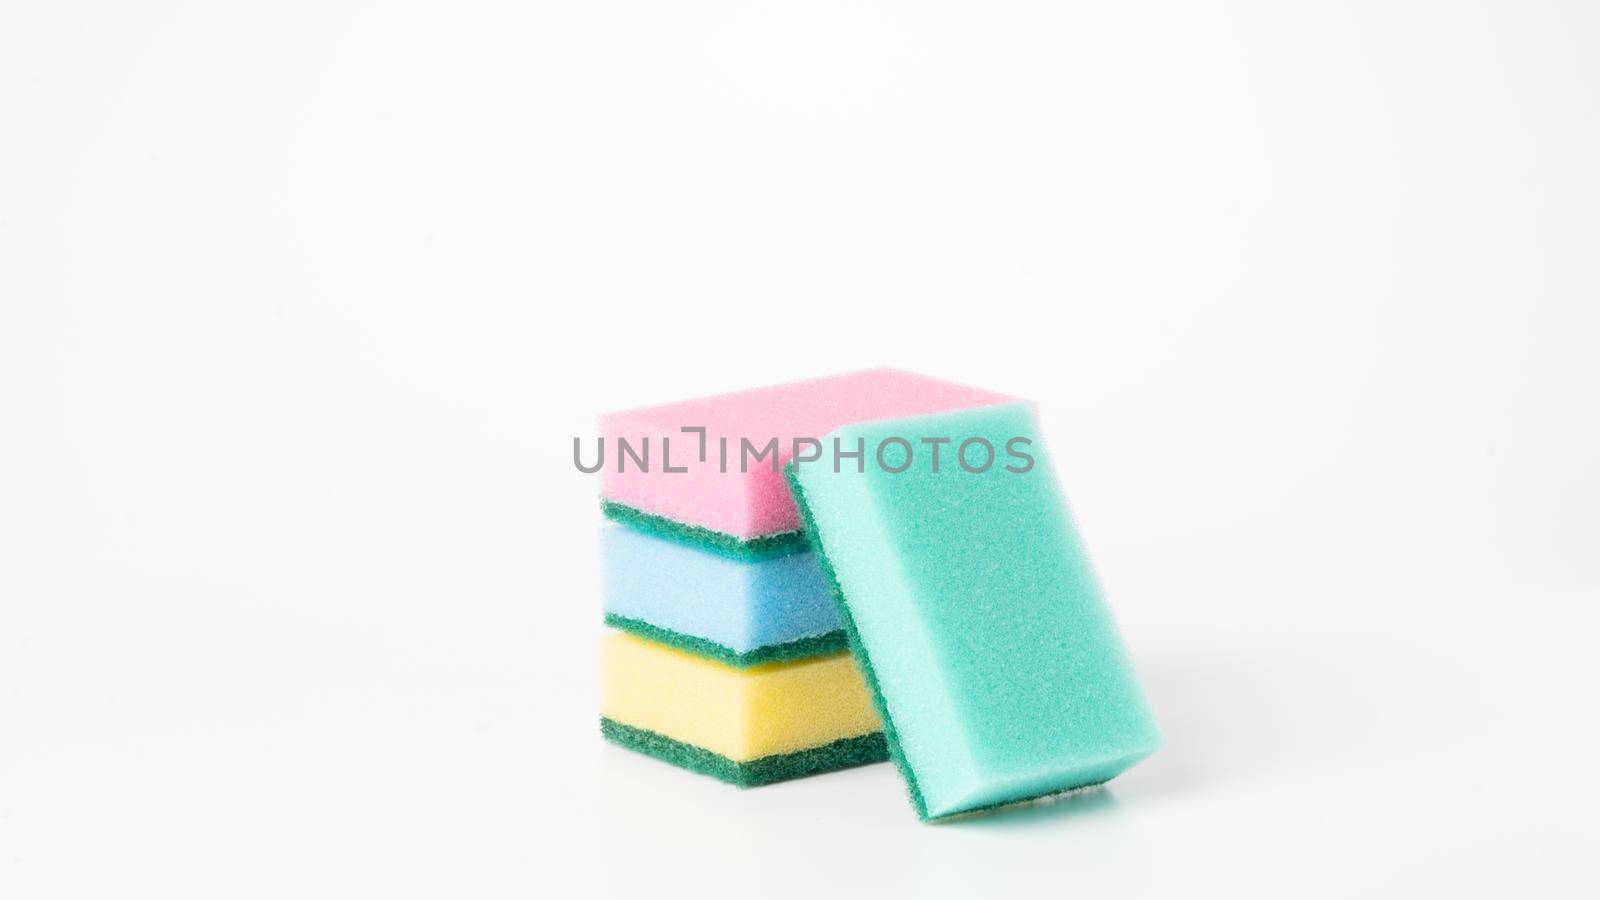 Colored sponges in a stack on a white background of the object. High quality photo